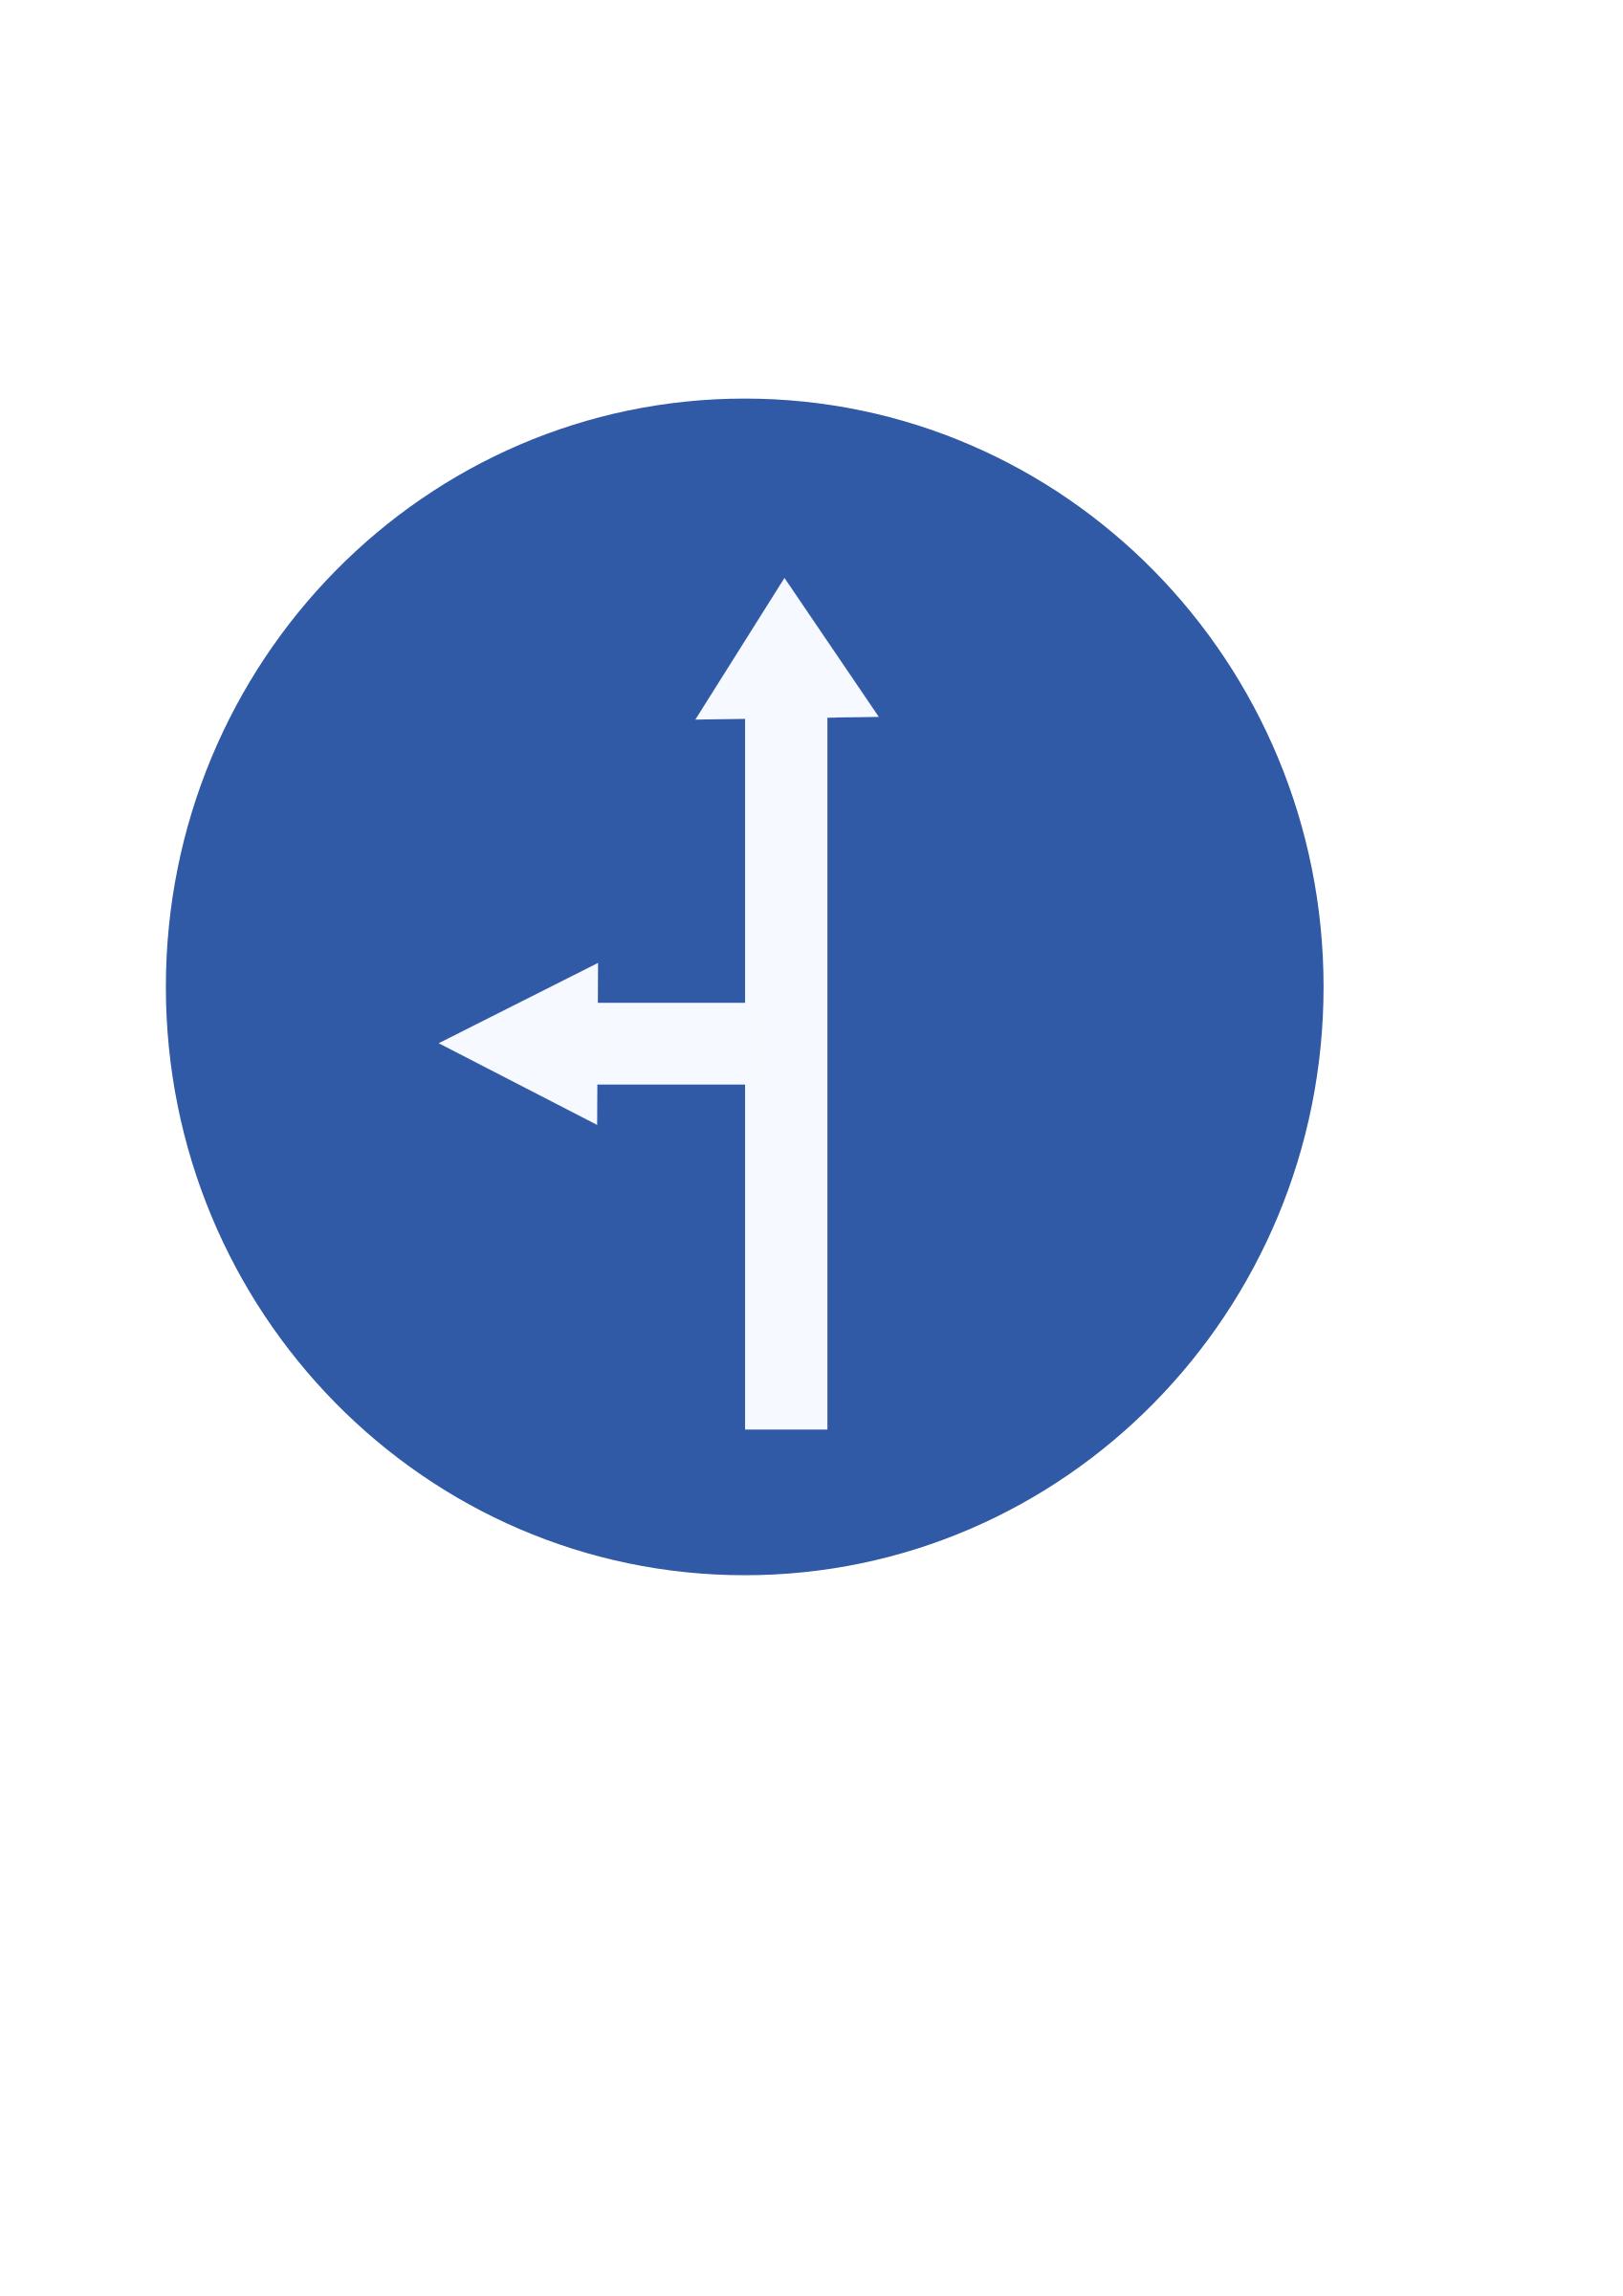 Indian road sign - Ahead or turn left PNG icons